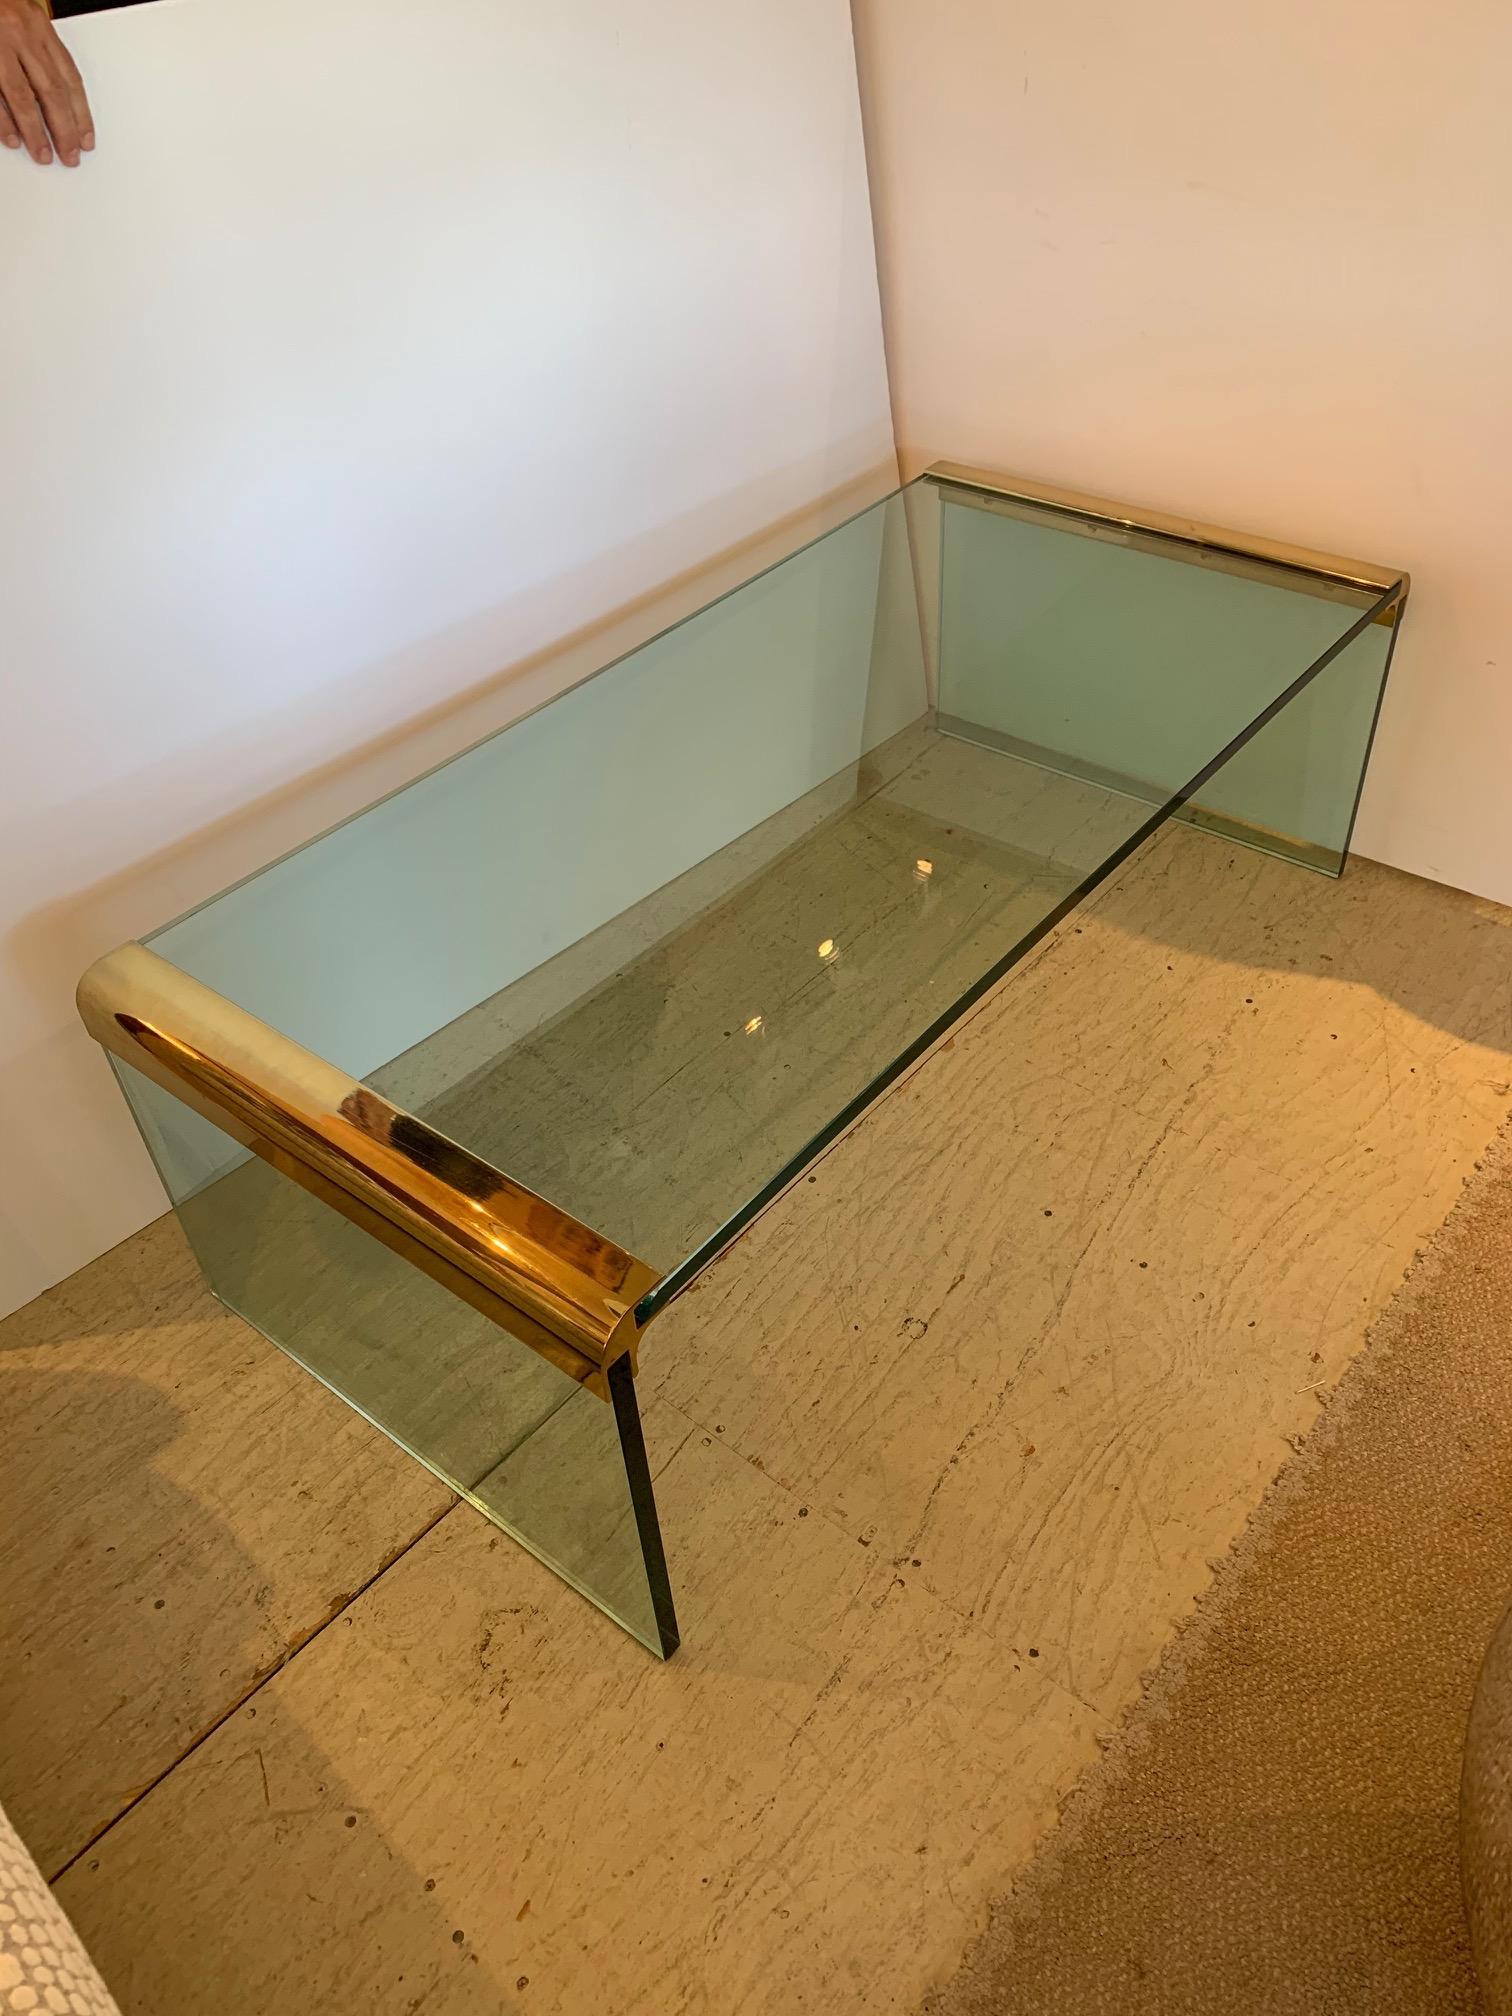 Thick plate glass top and sides joined by heavy brass waterfall corners. Super sleek and iconic midcentury design.